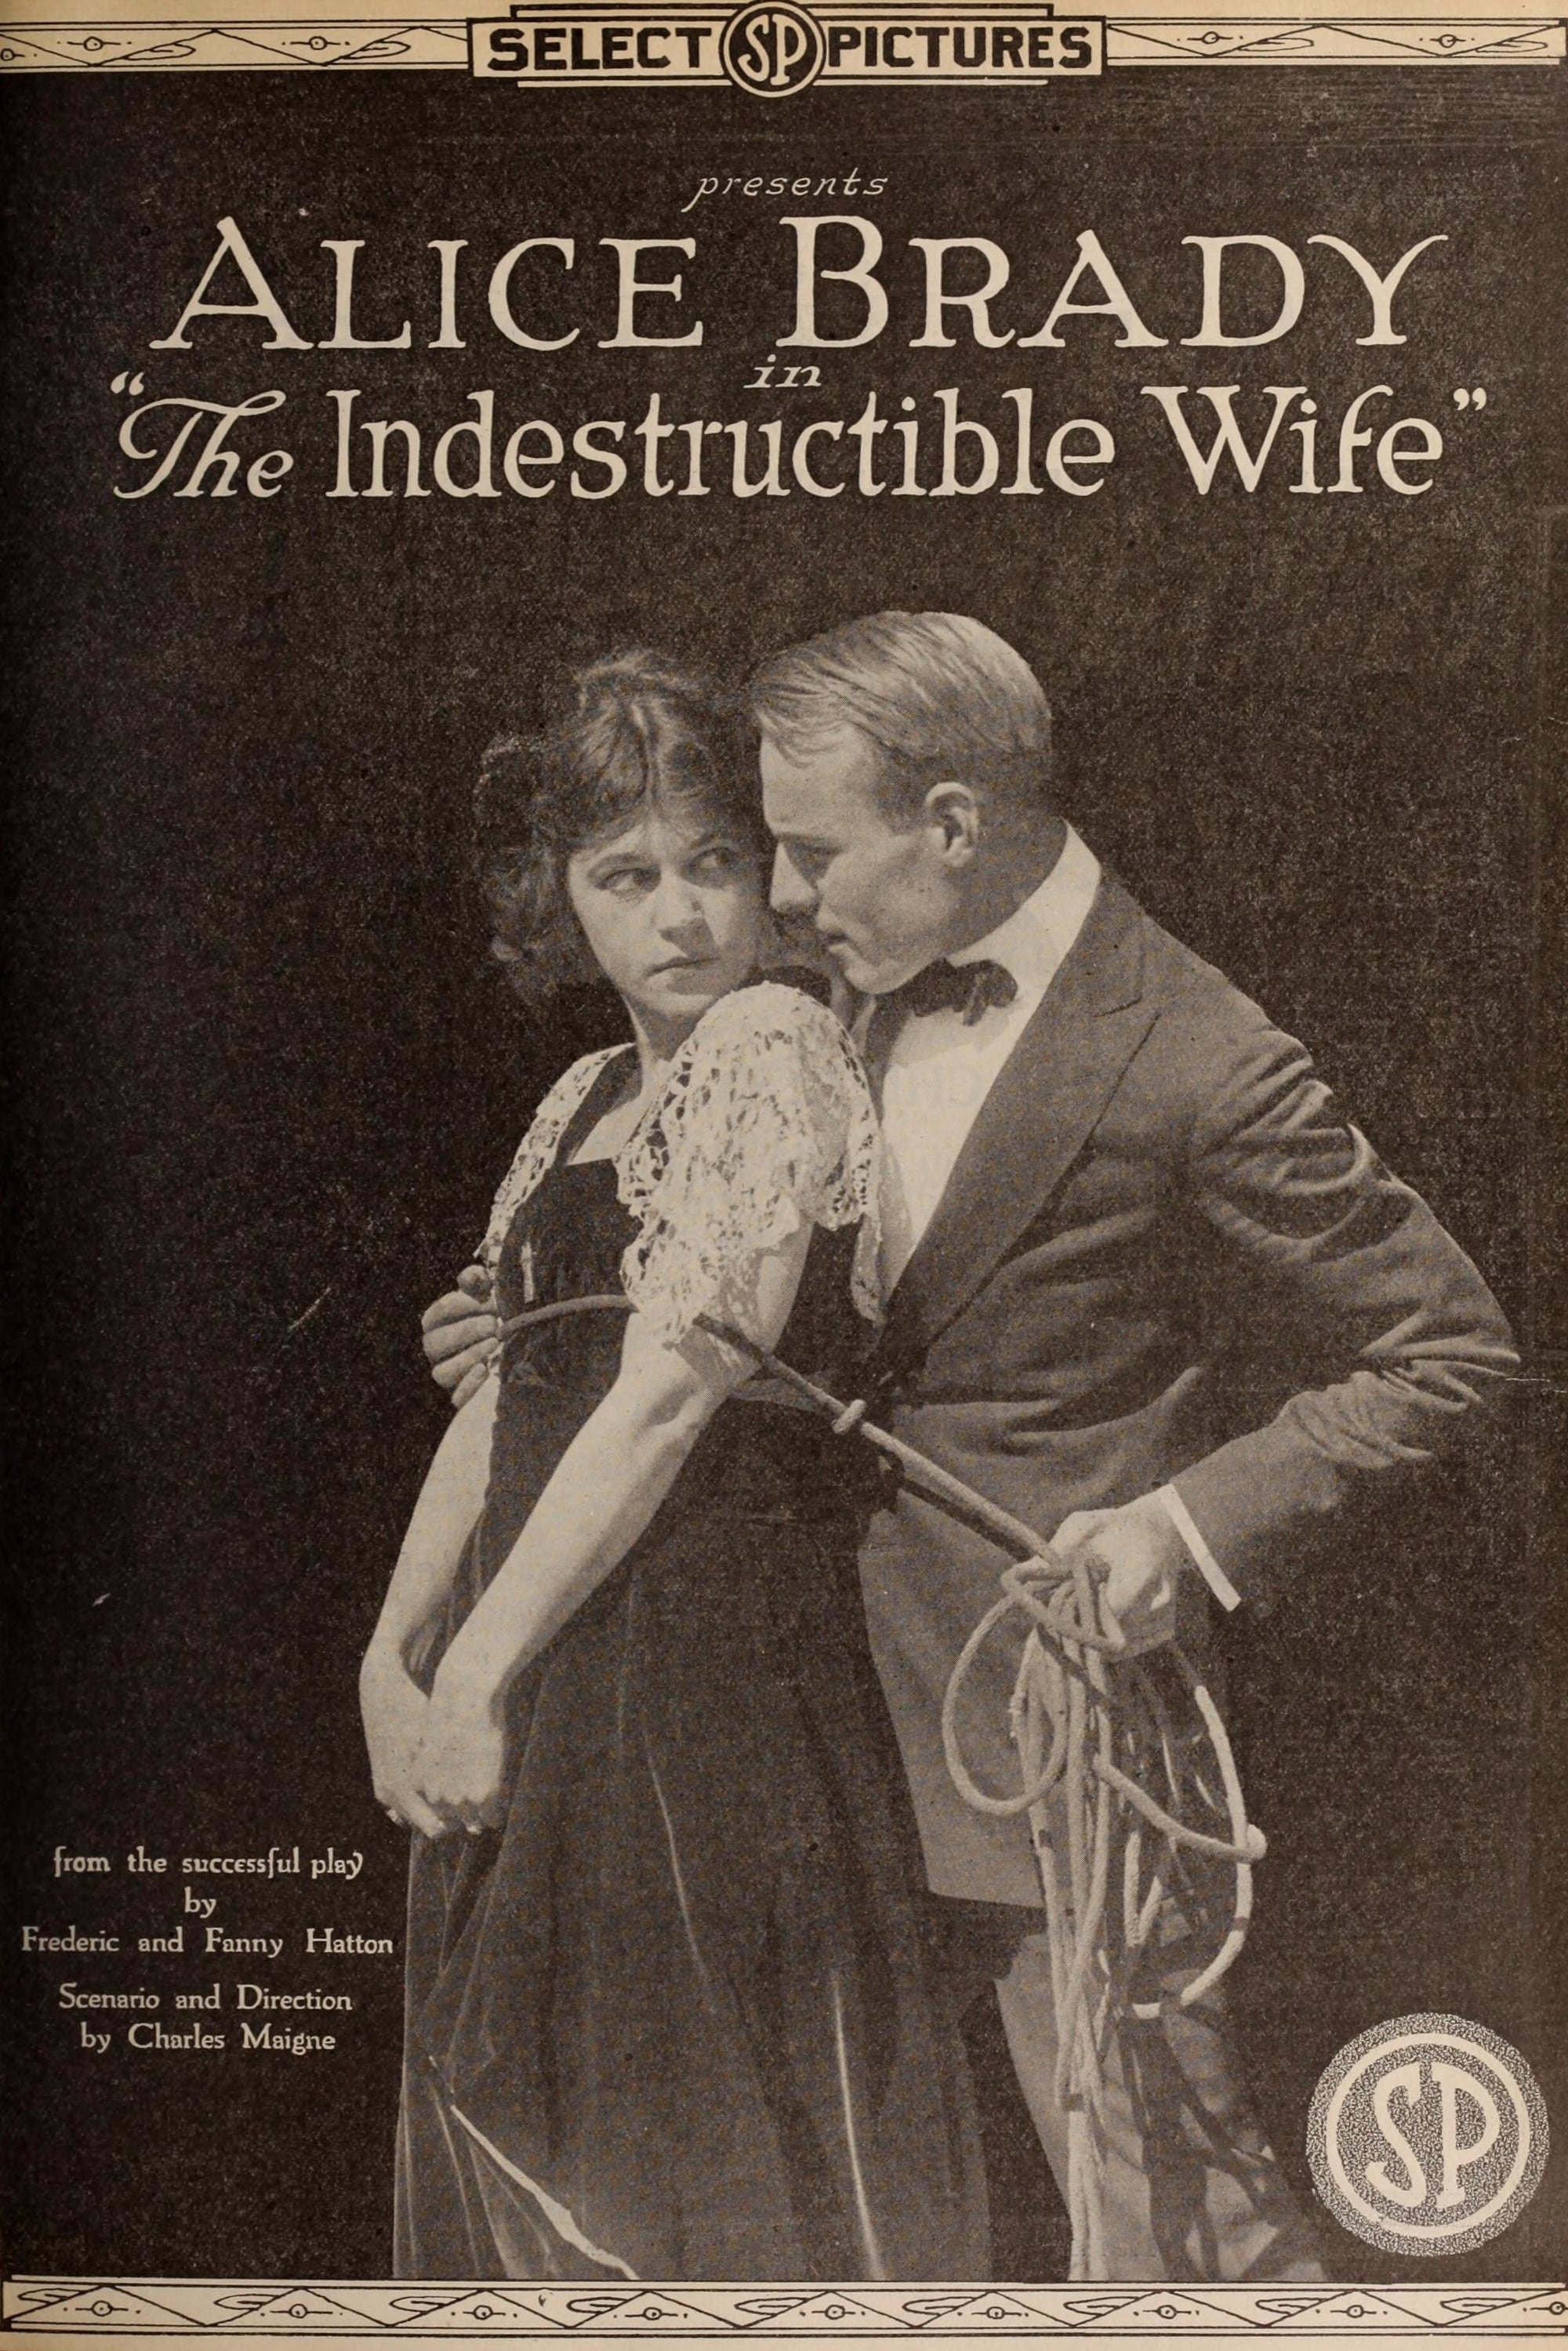 The Indestructible Wife